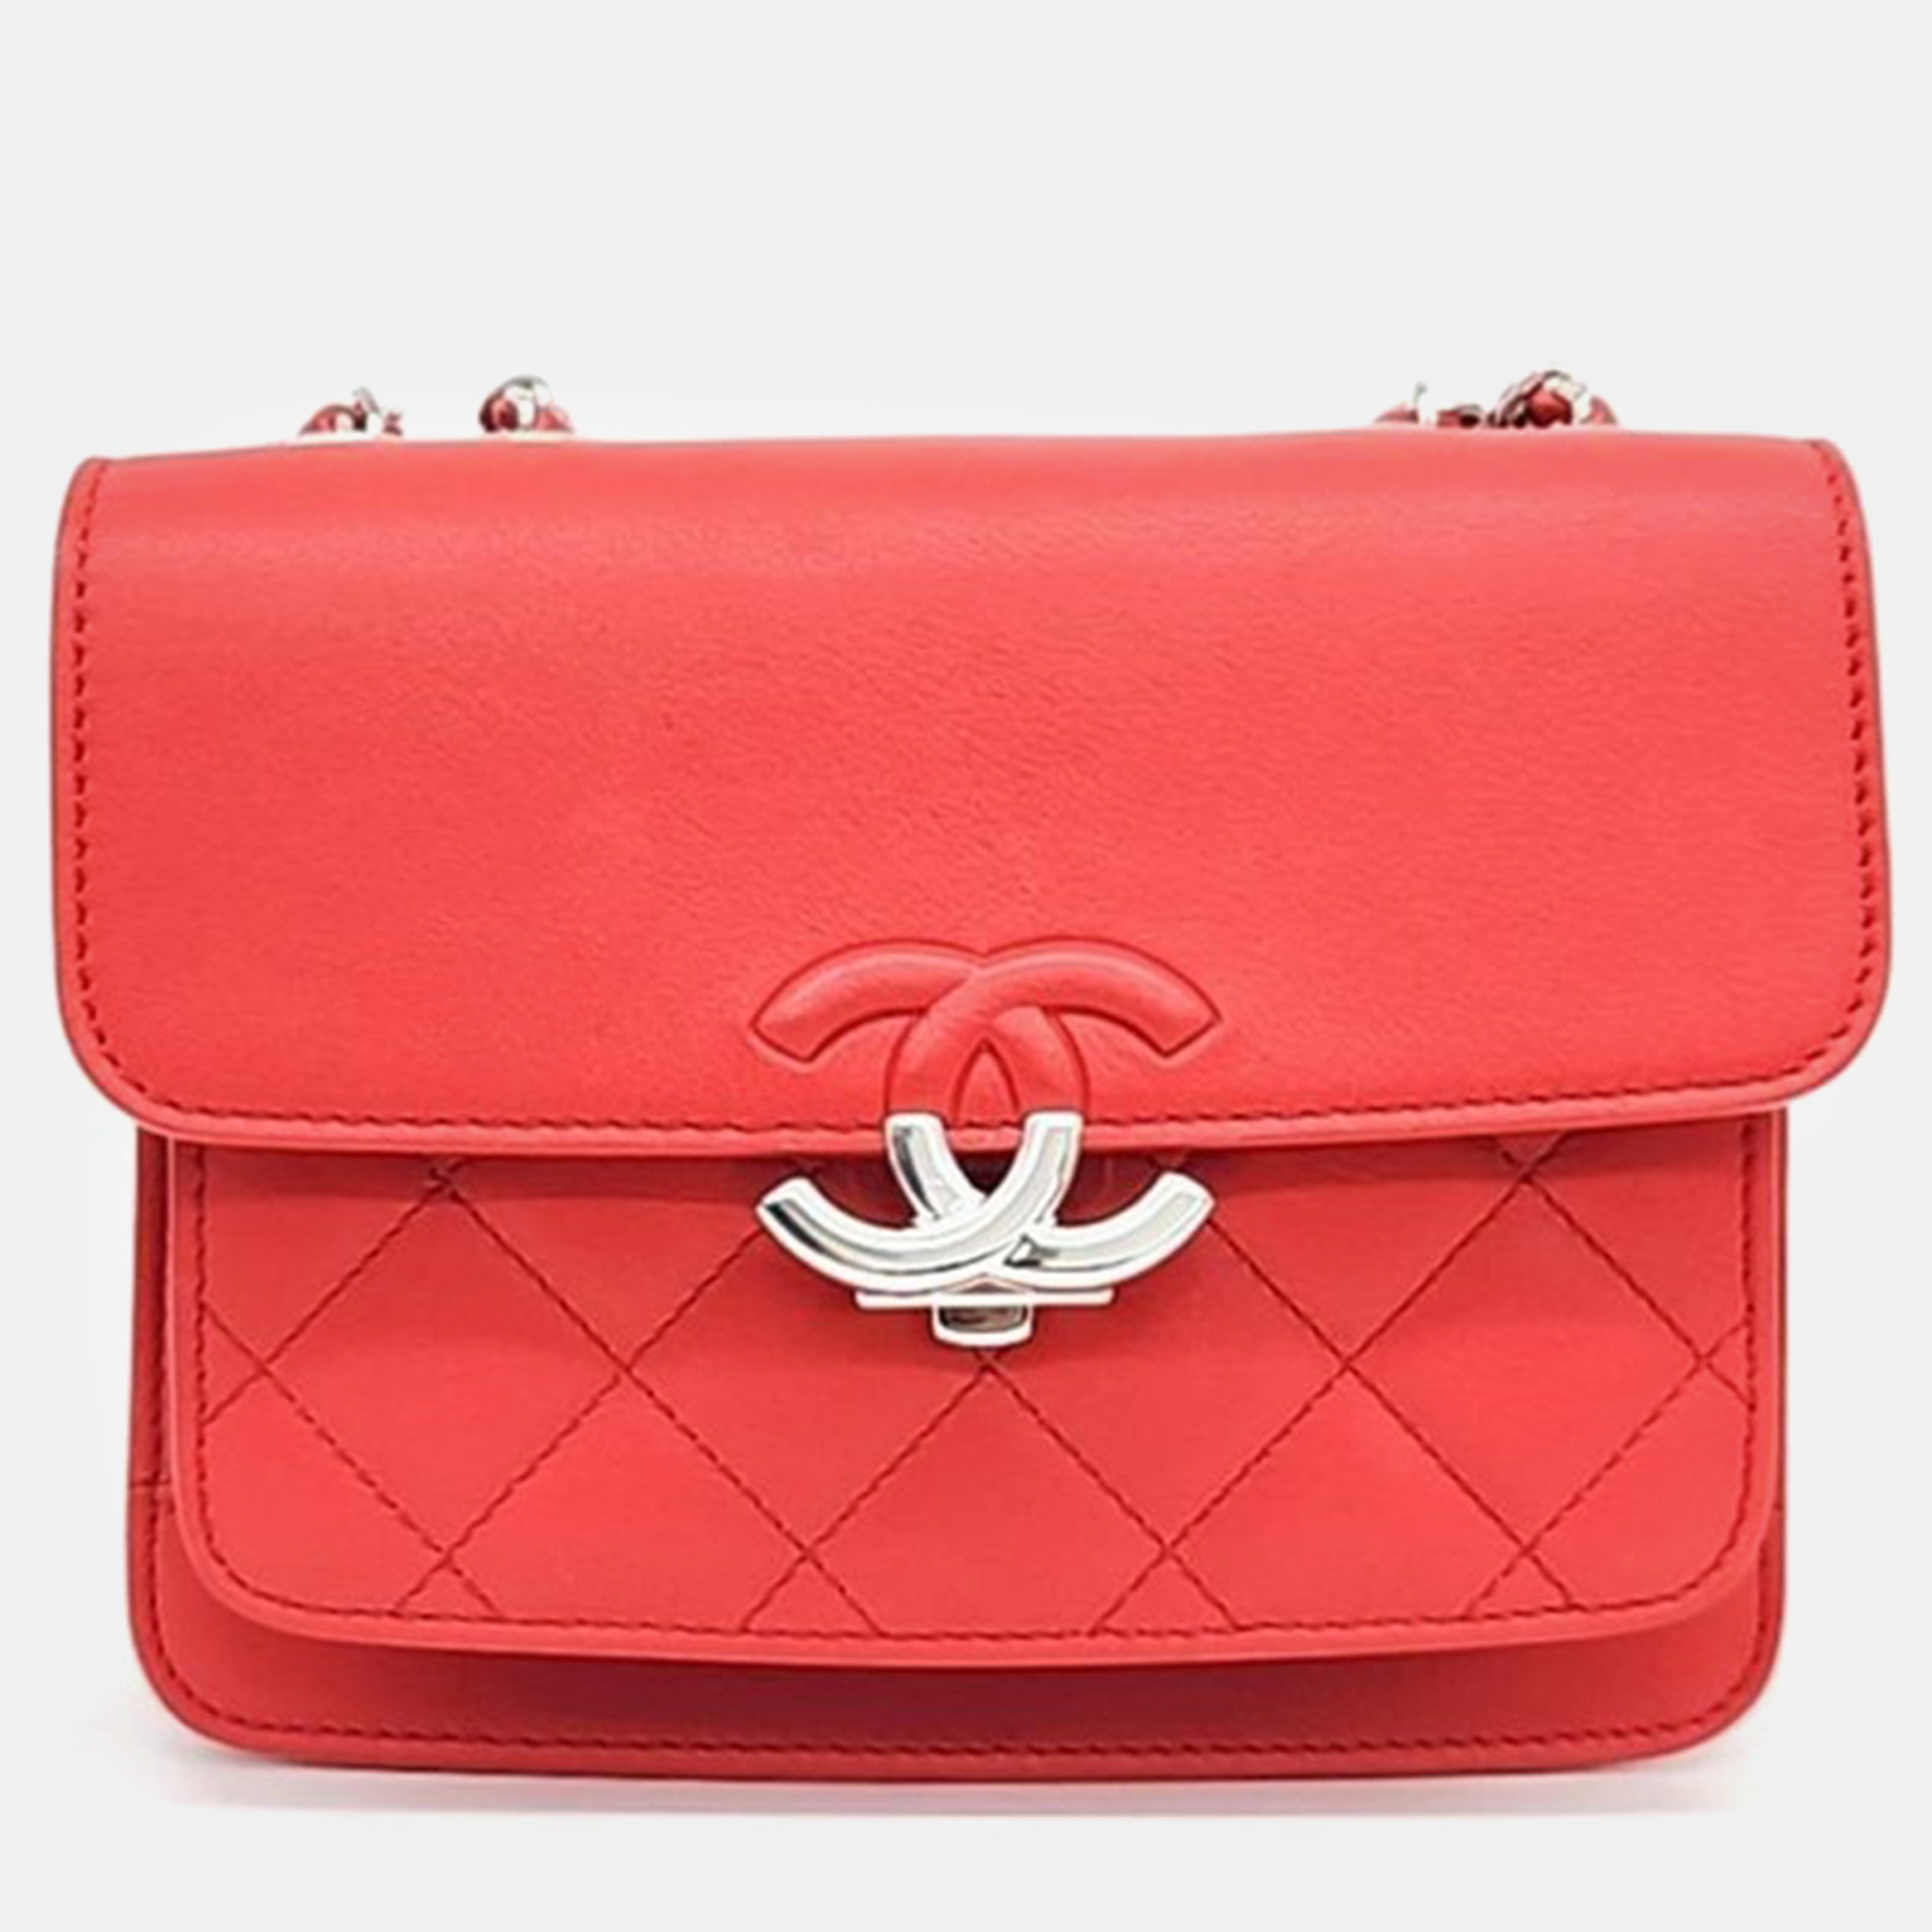 Chanel red leather chain shoulder bag